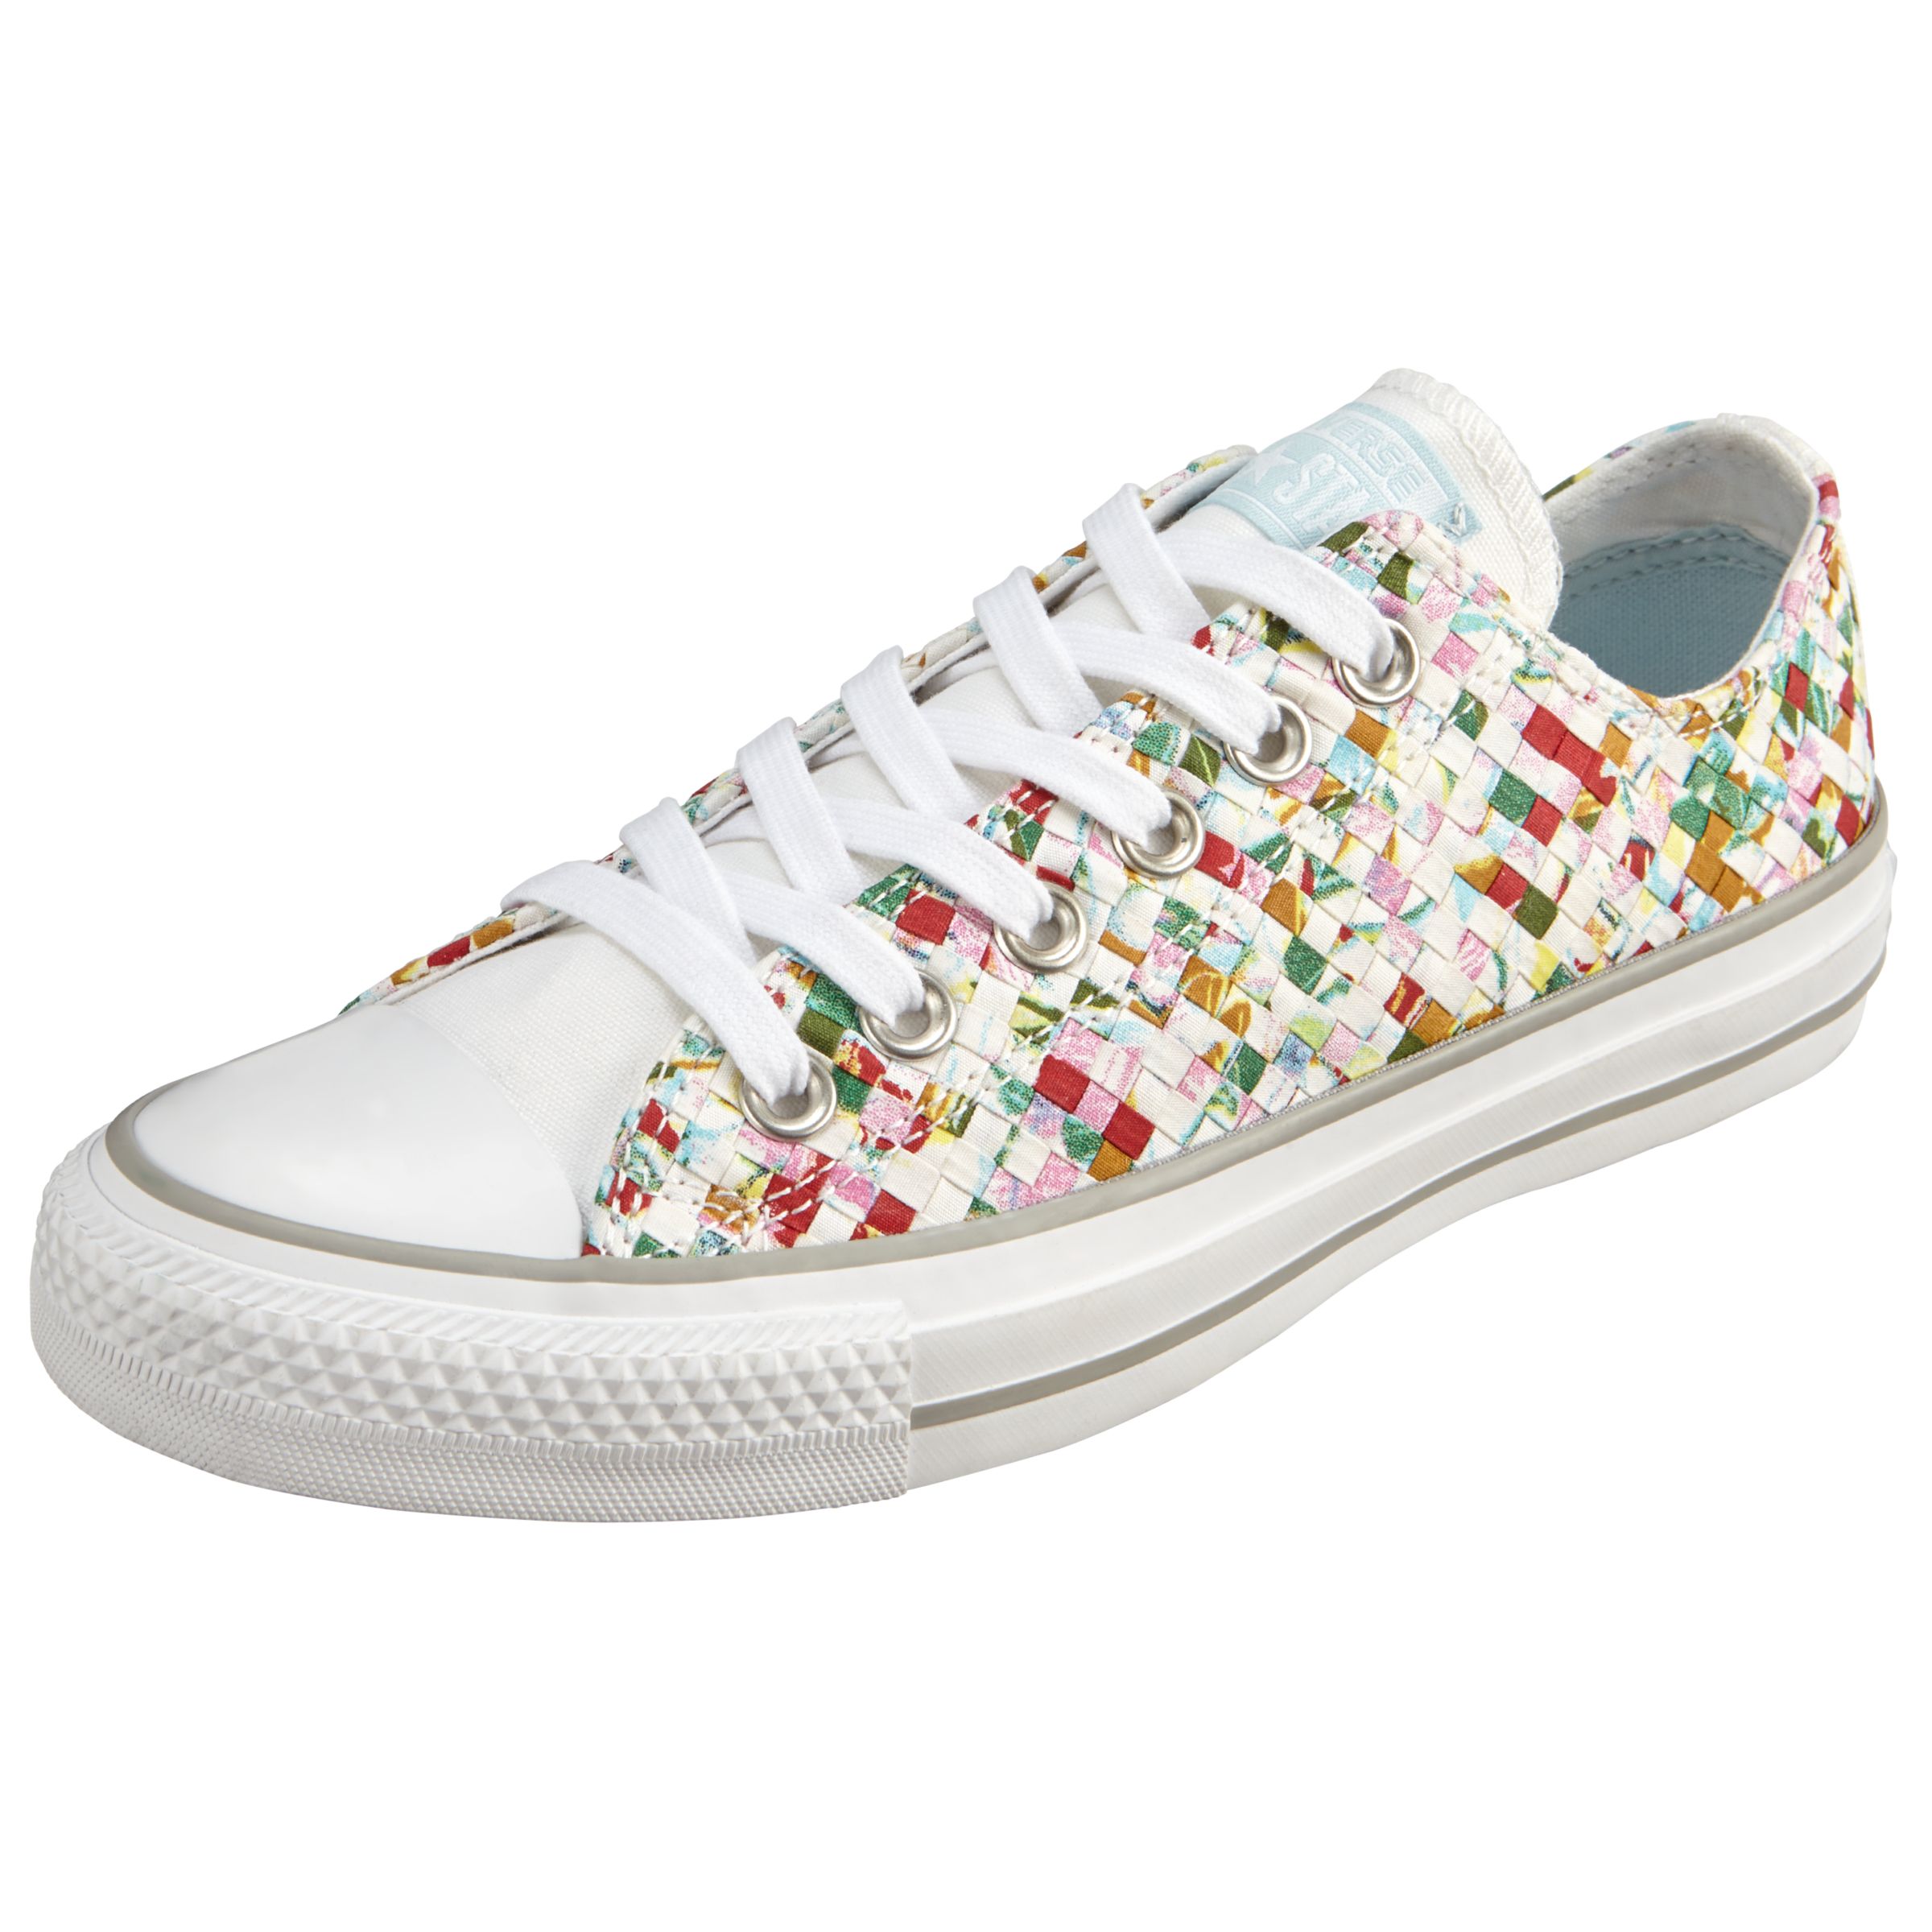 Converse Chuck Taylor All Star Ox Woven Print Trainers, Multi at John Lewis  \u0026 Partners